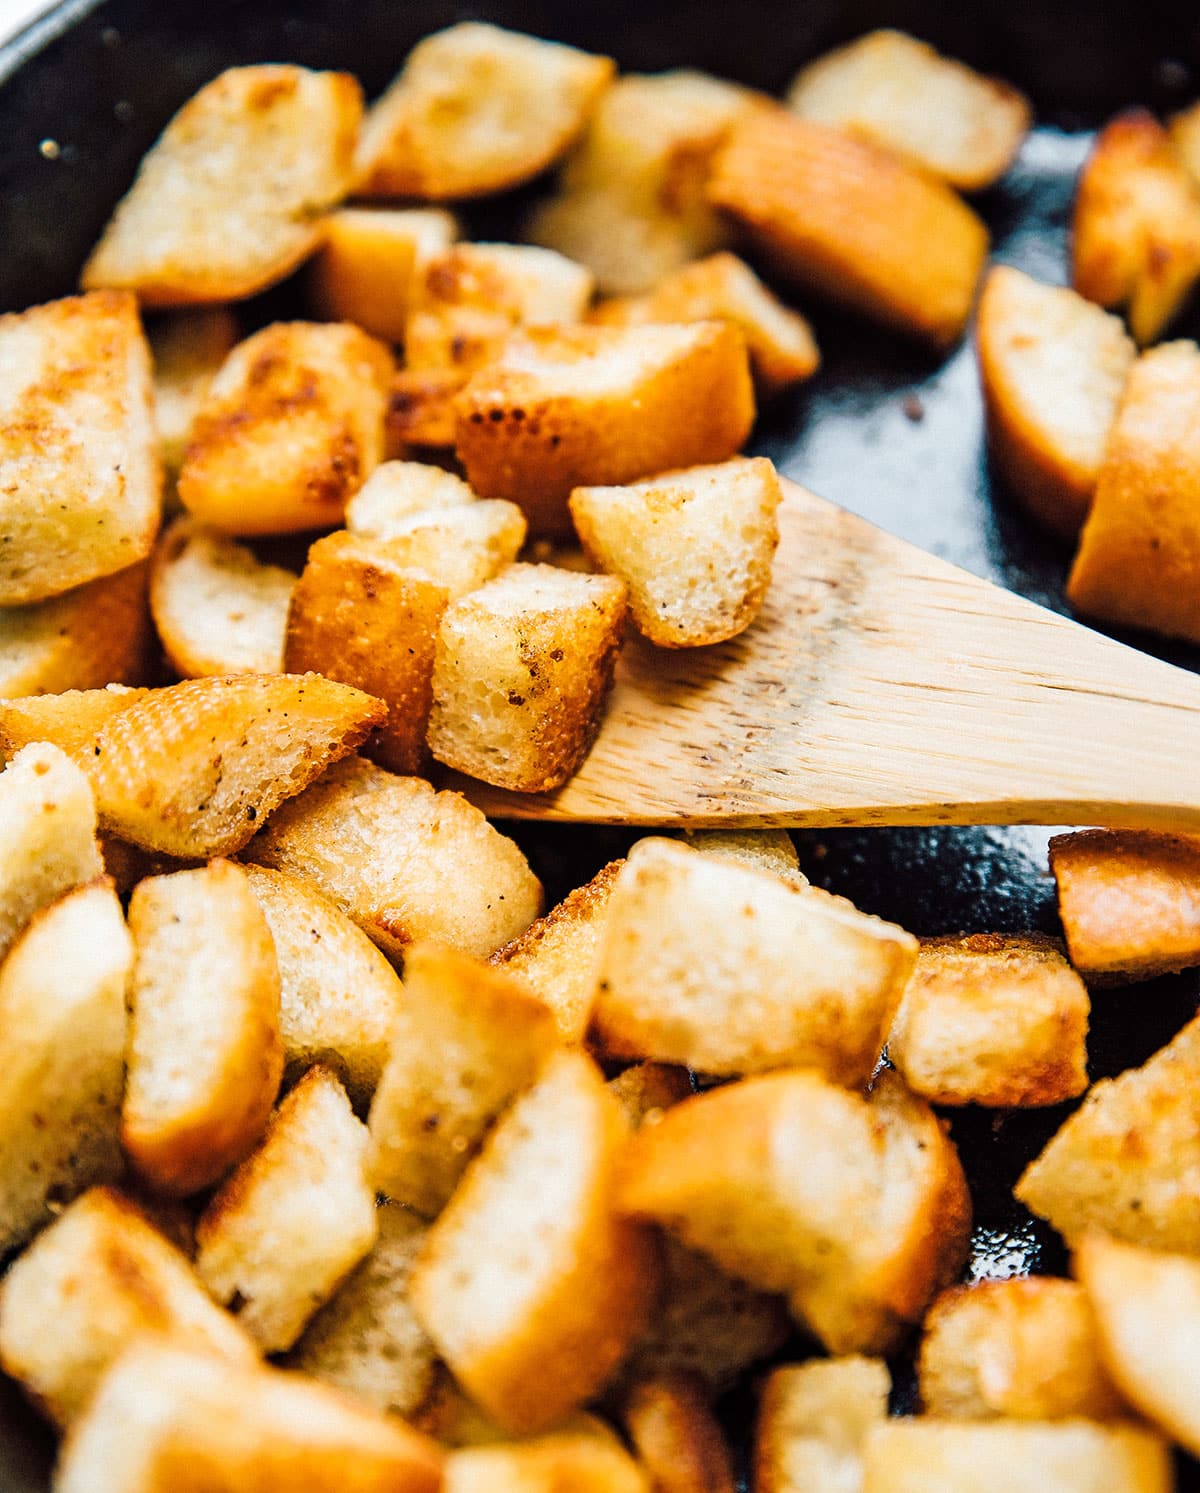 Croutons in a pan with a spoon.